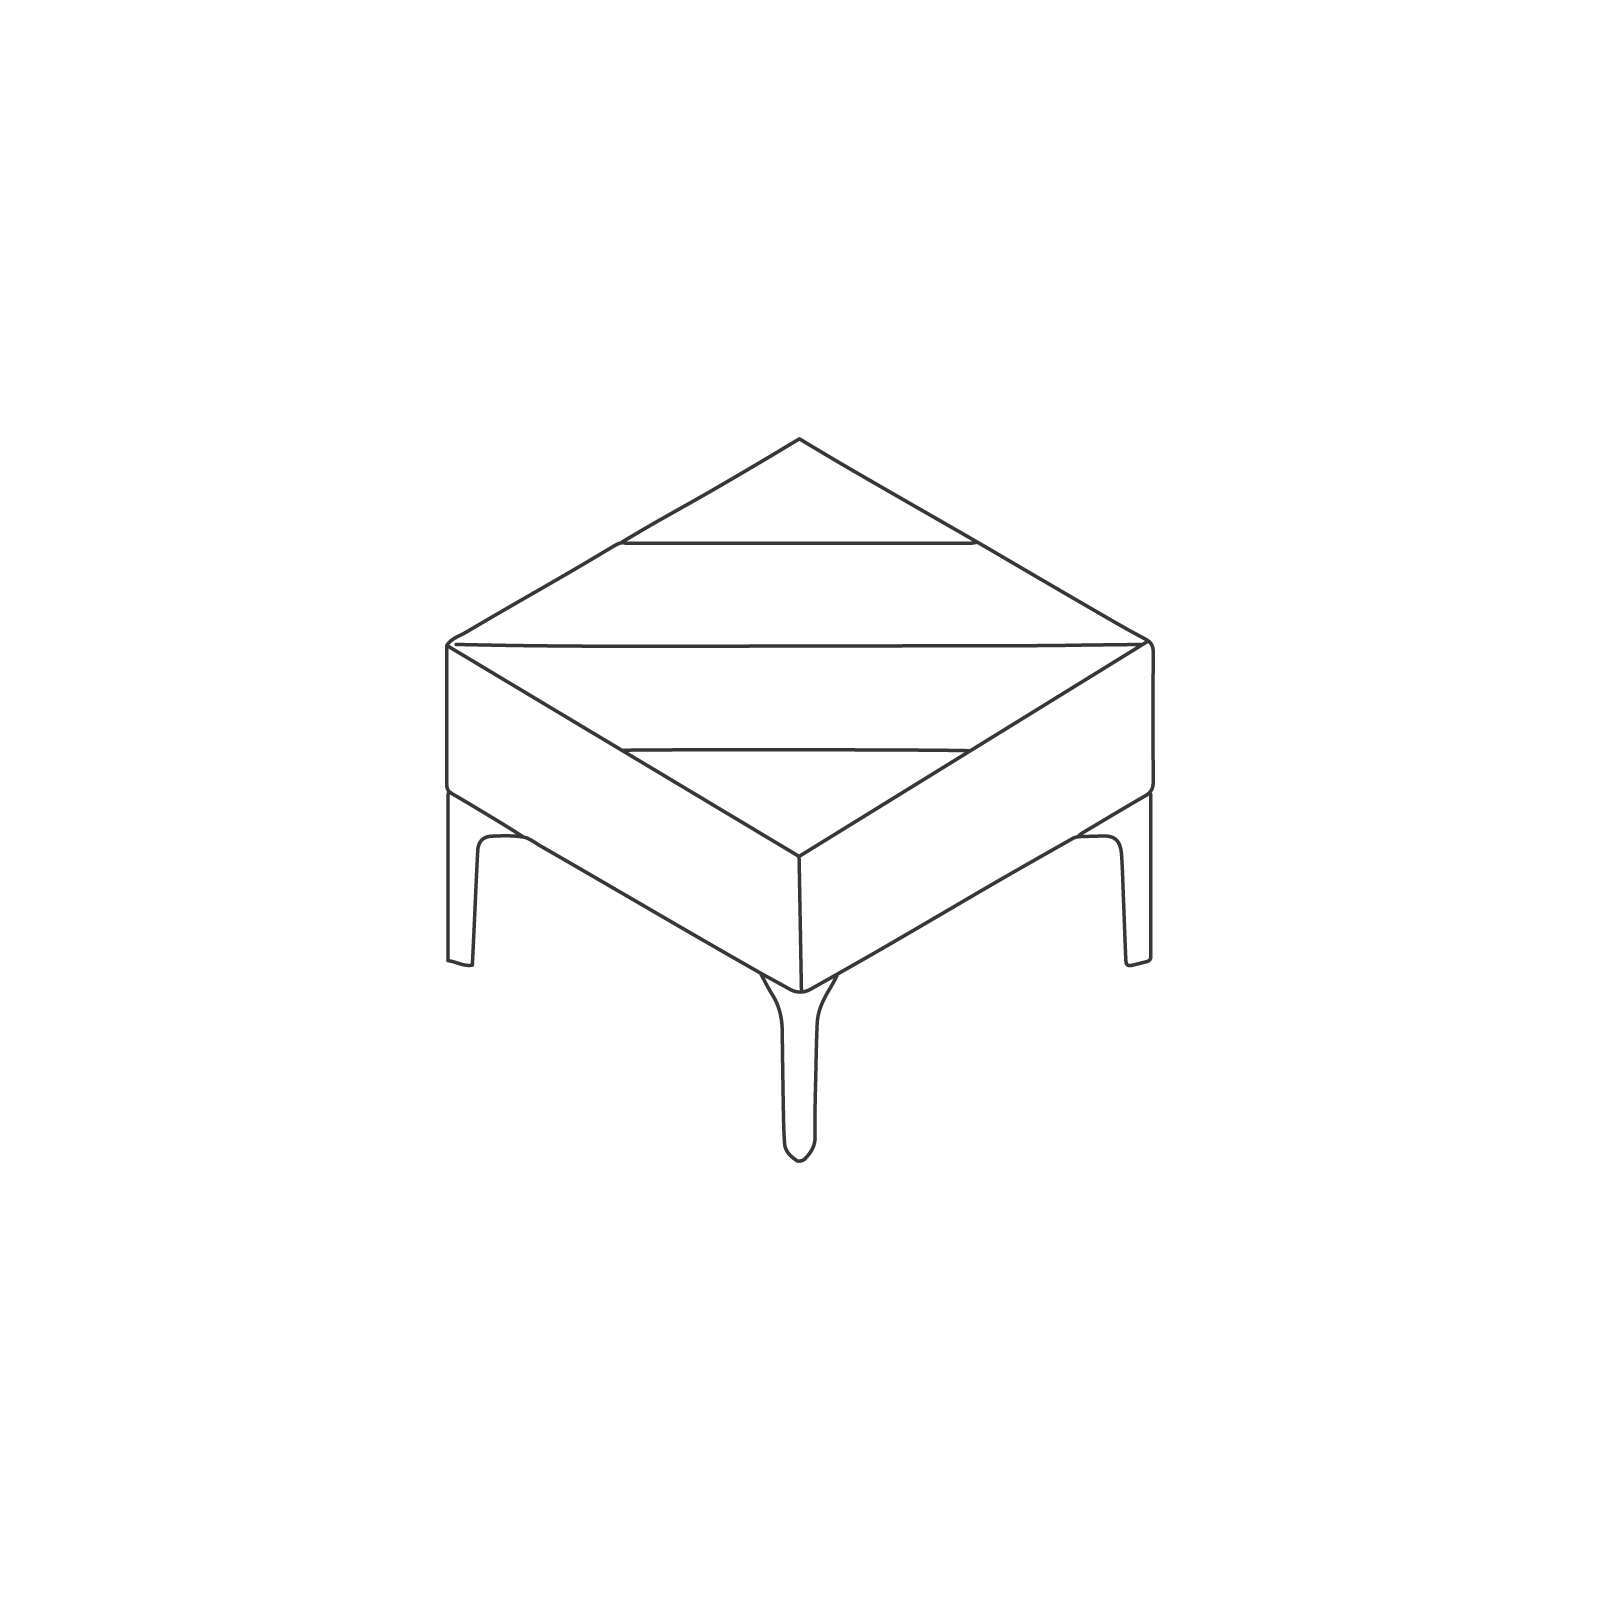 A line drawing of Hatch Single Stool.